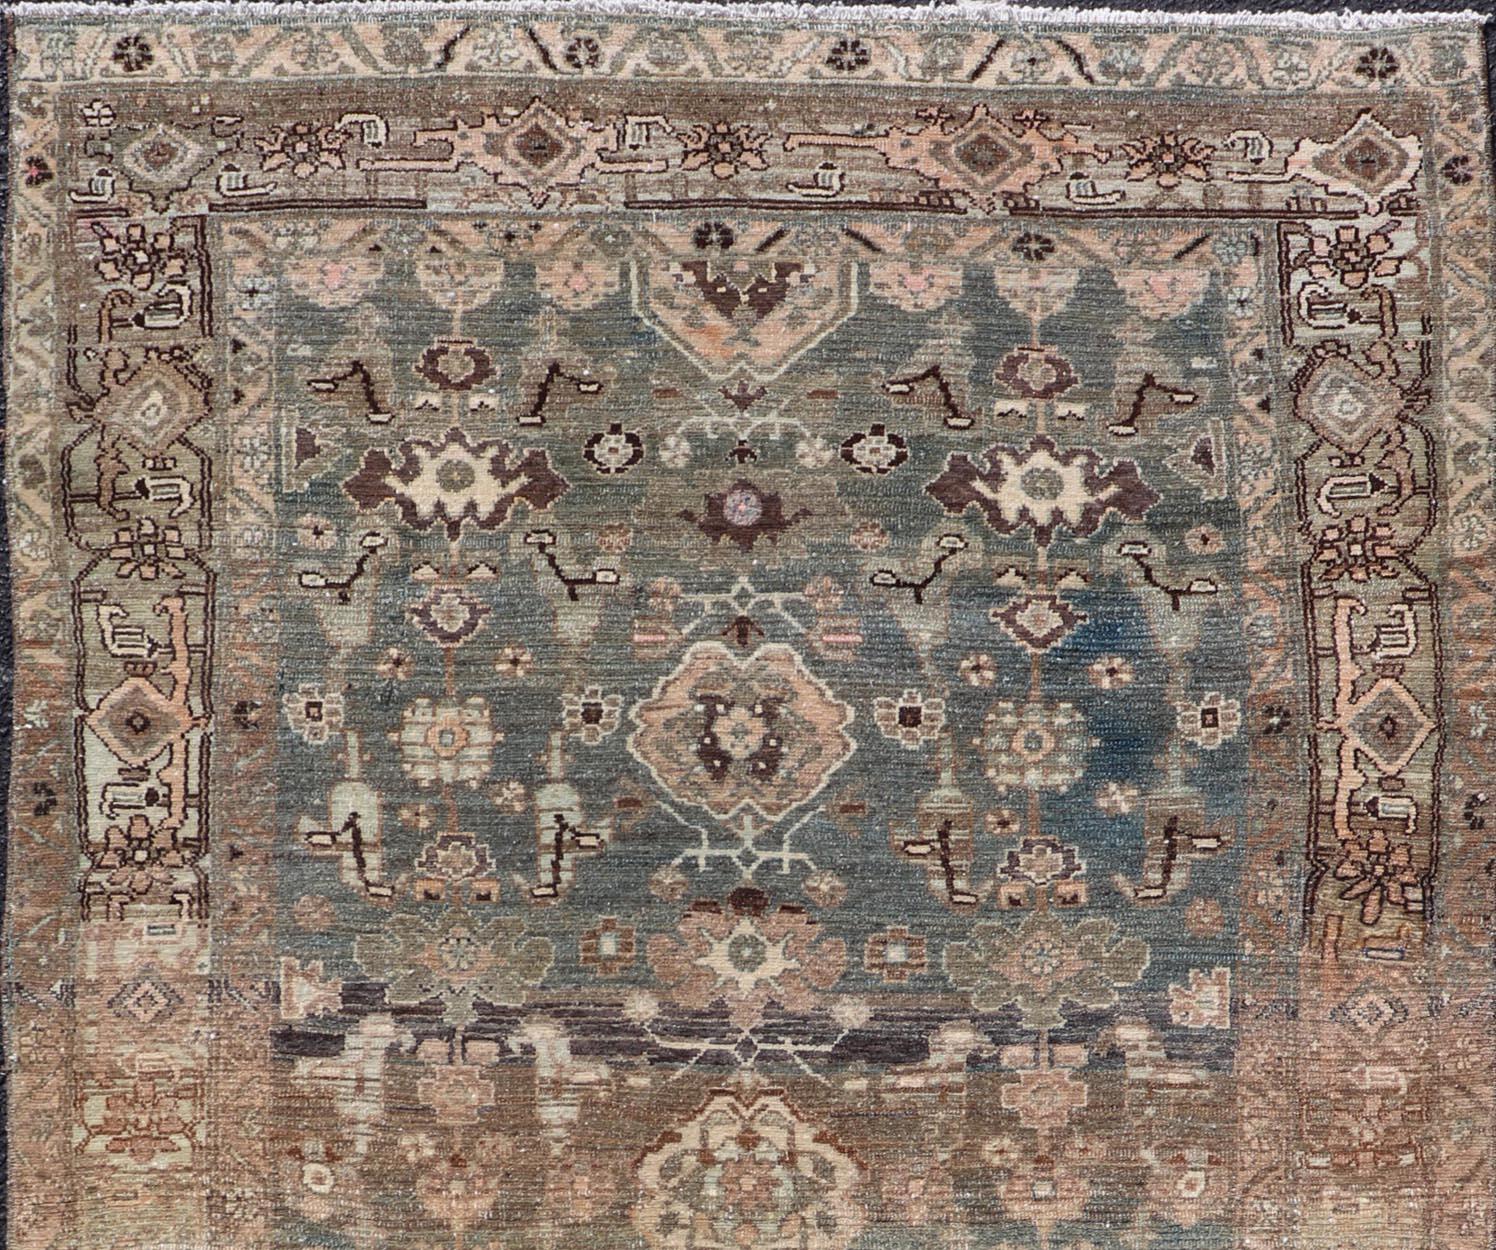 Tribal Antique Nahavand Rug with All-Over Sub-Geometric Design in Muted Colors For Sale